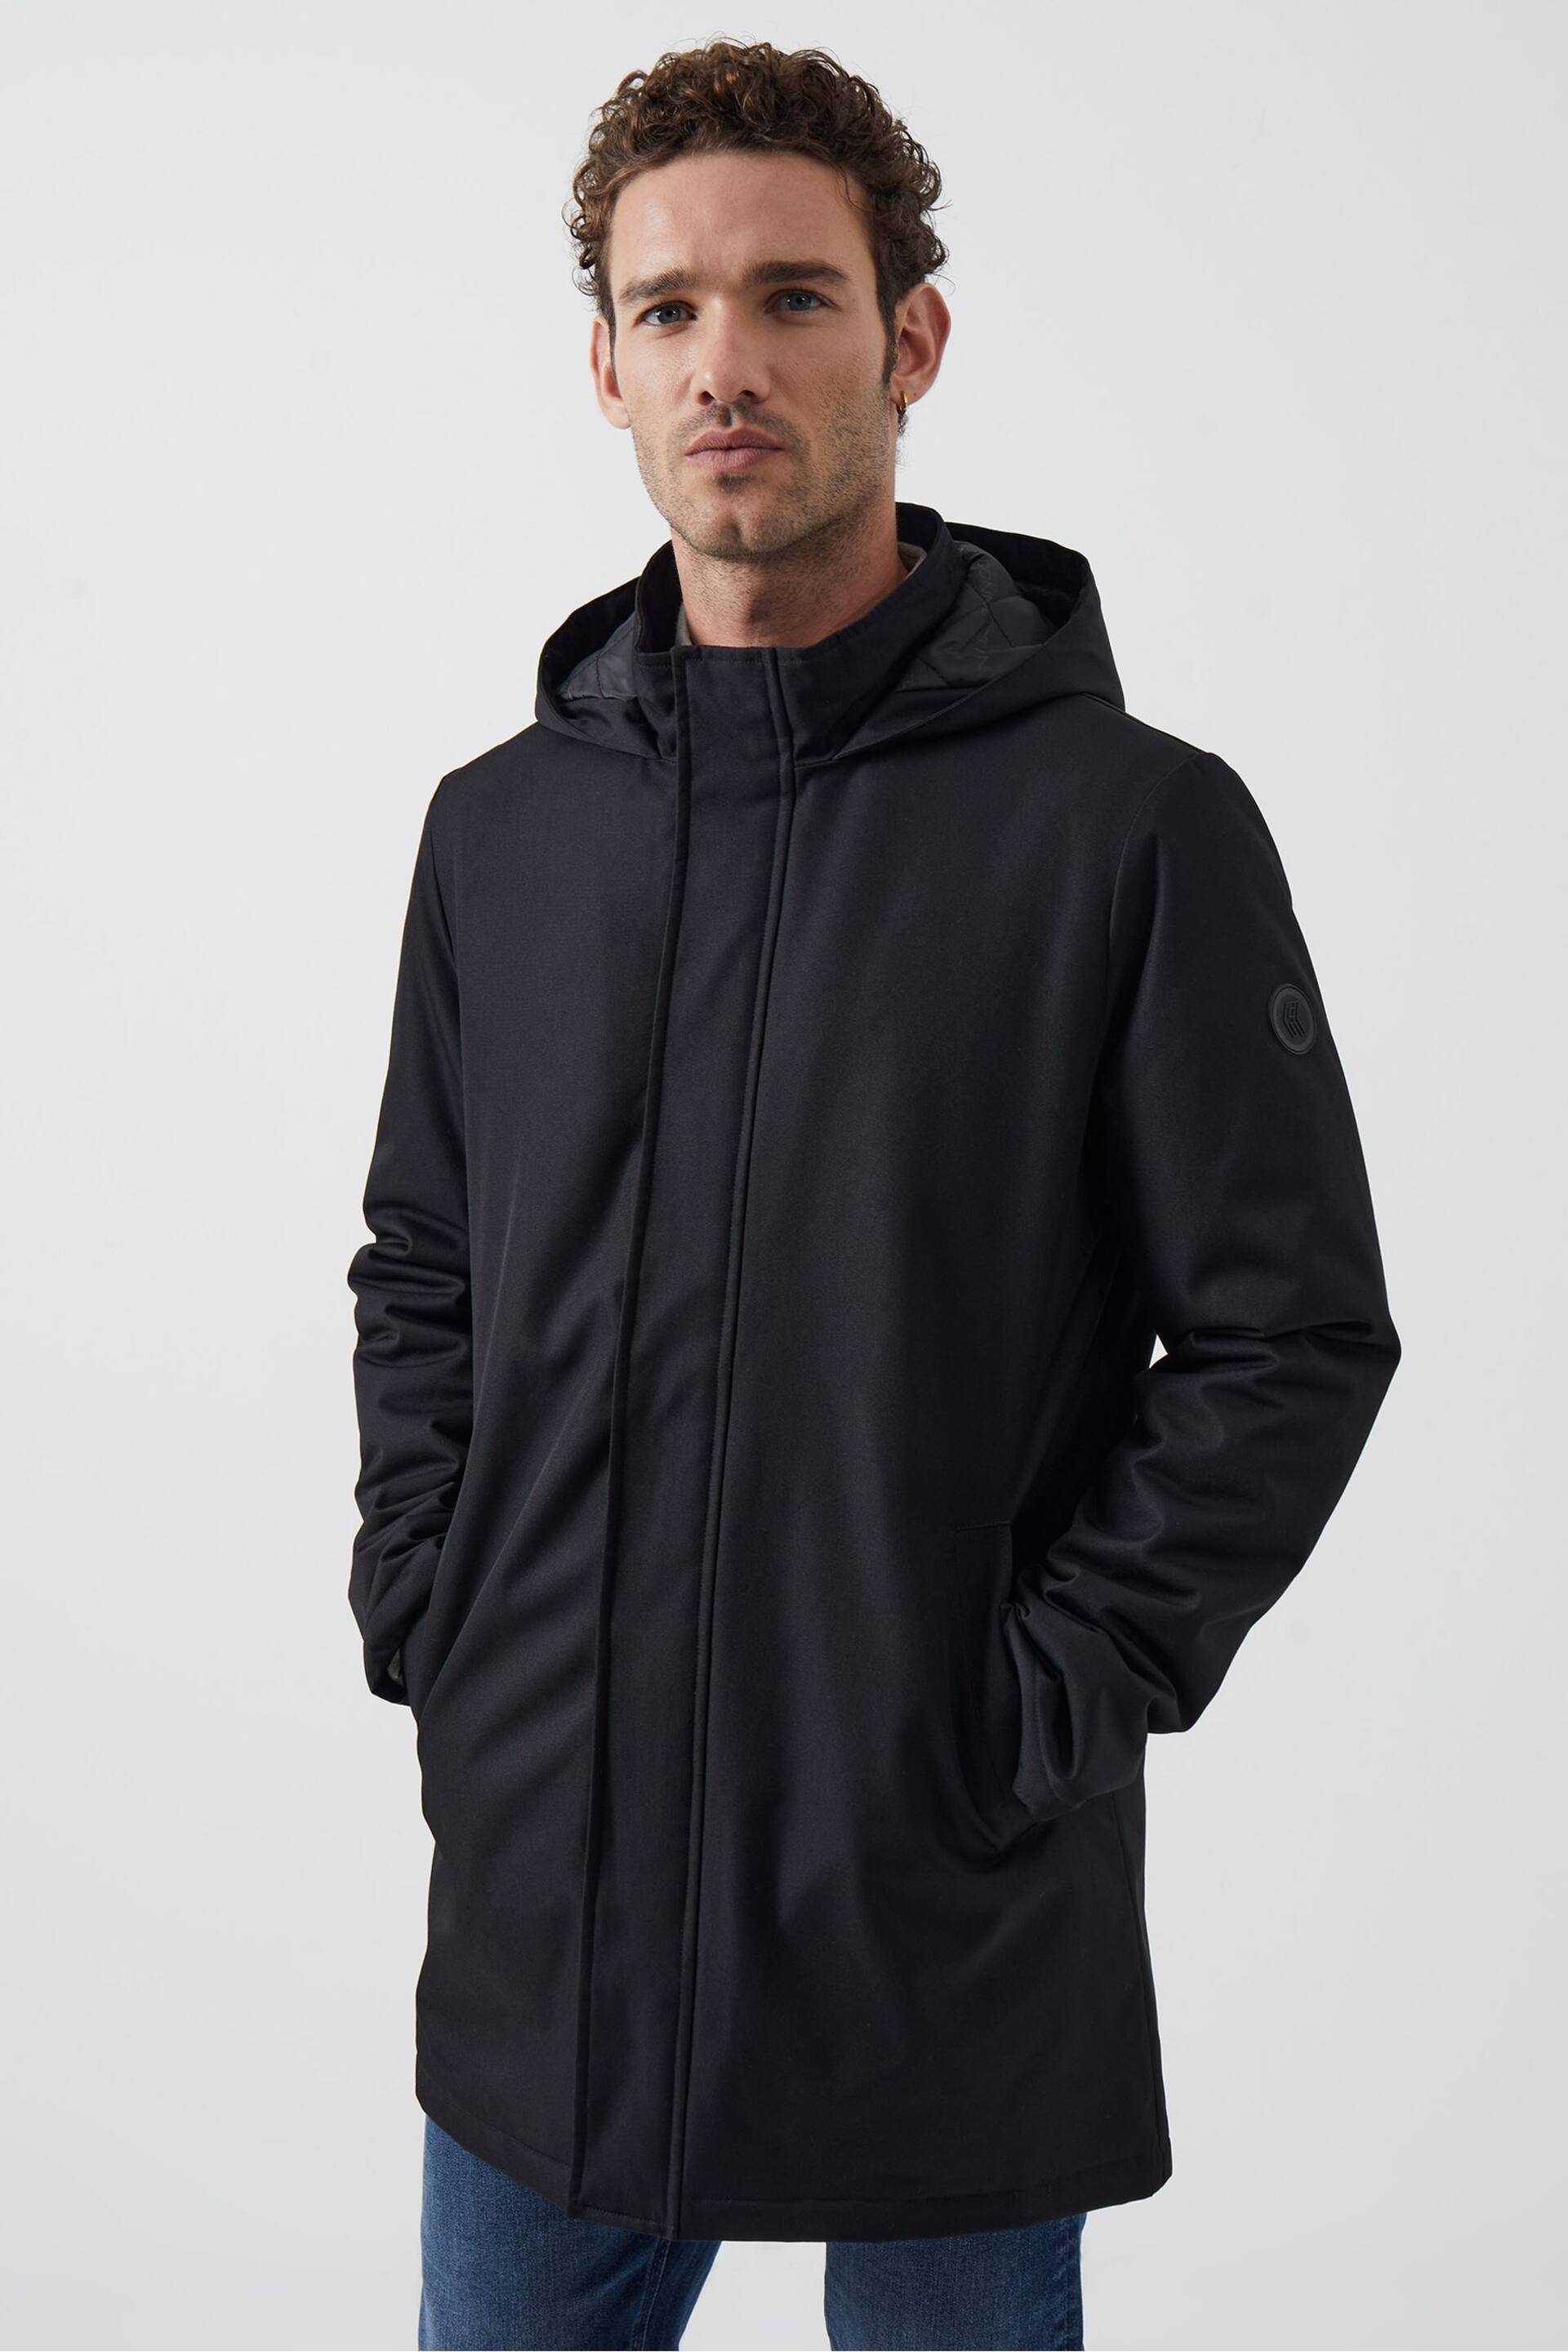 French Connection Black Hooded Trench Coat - Image 1 of 2